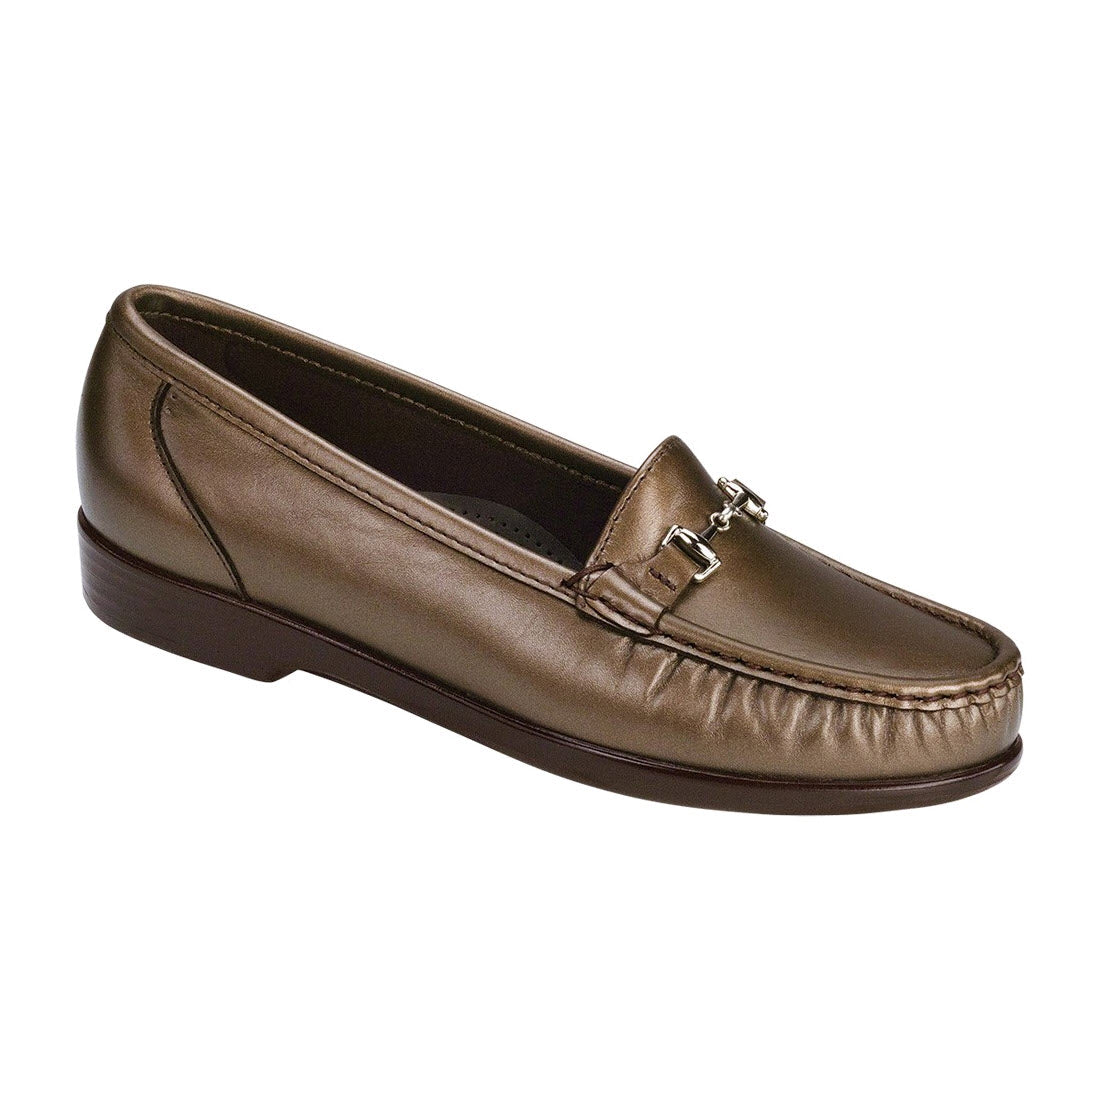 A brown leather SAS Metro Bronze slip-on loafer with a metal buckle and a low heel, isolated on a white background.